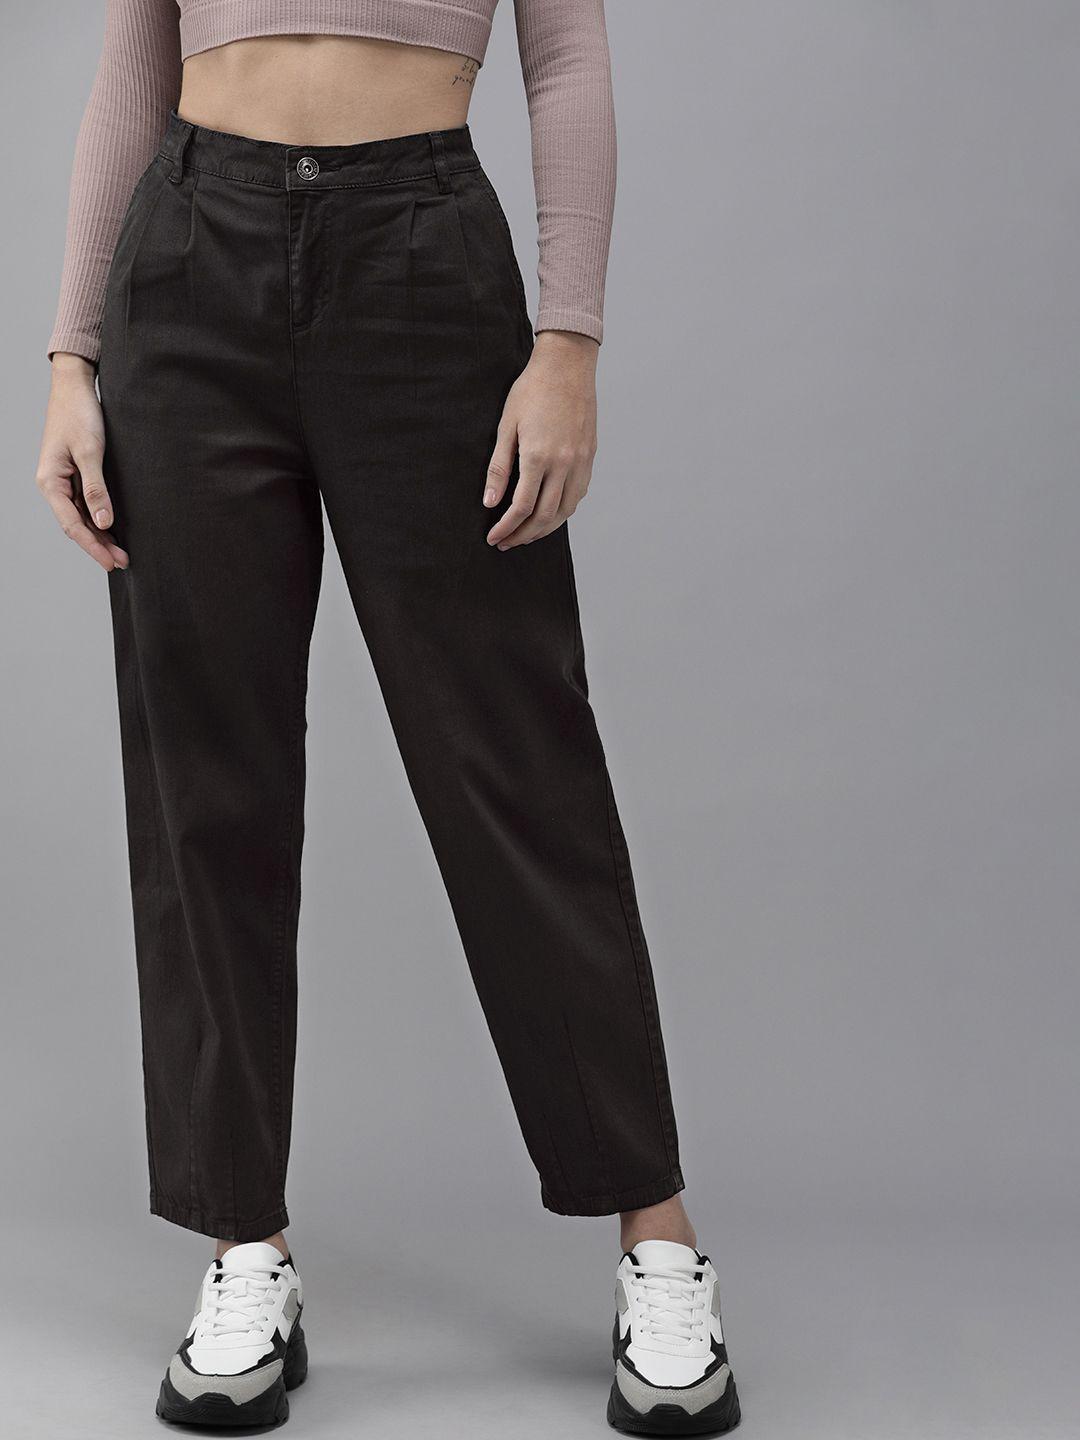 the roadster lifestyle co women black pleated chinos